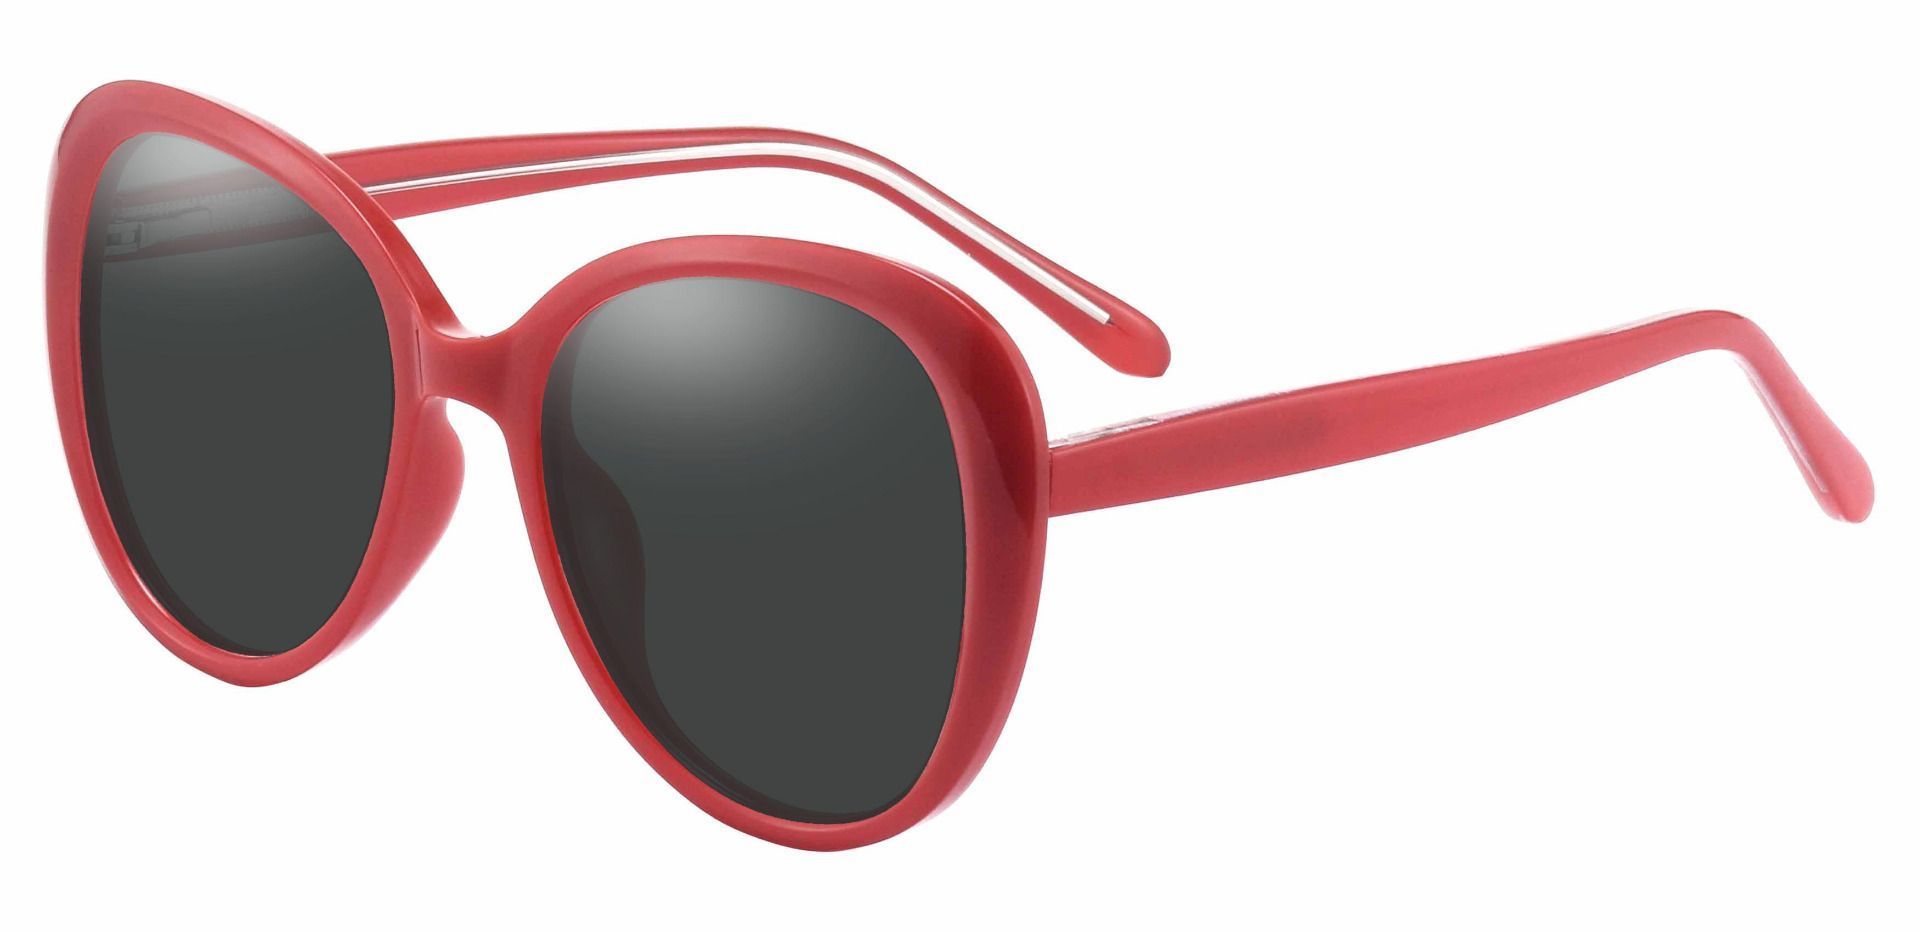 Sheridan Oval Lined Bifocal Sunglasses - Red Frame With Gray Lenses